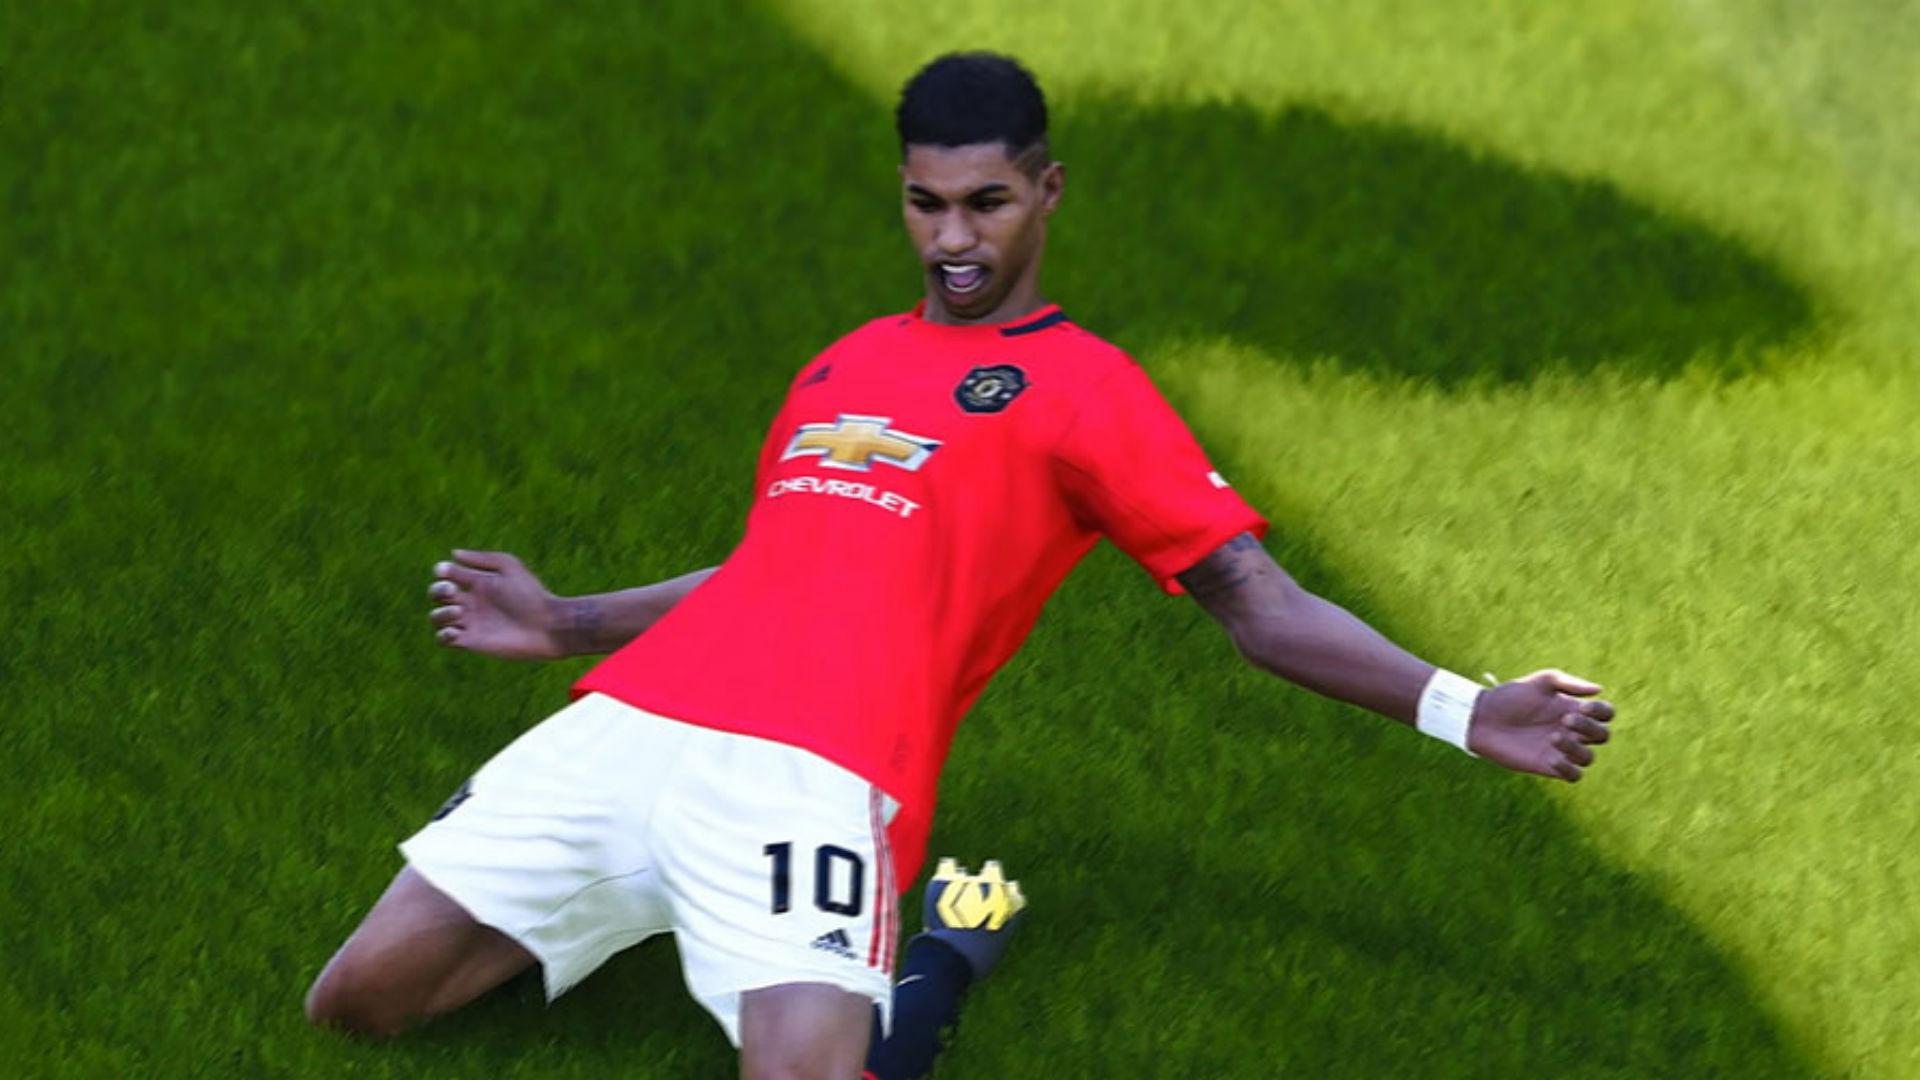 Best PES 2020 wonderkids: the cheap young players to sign